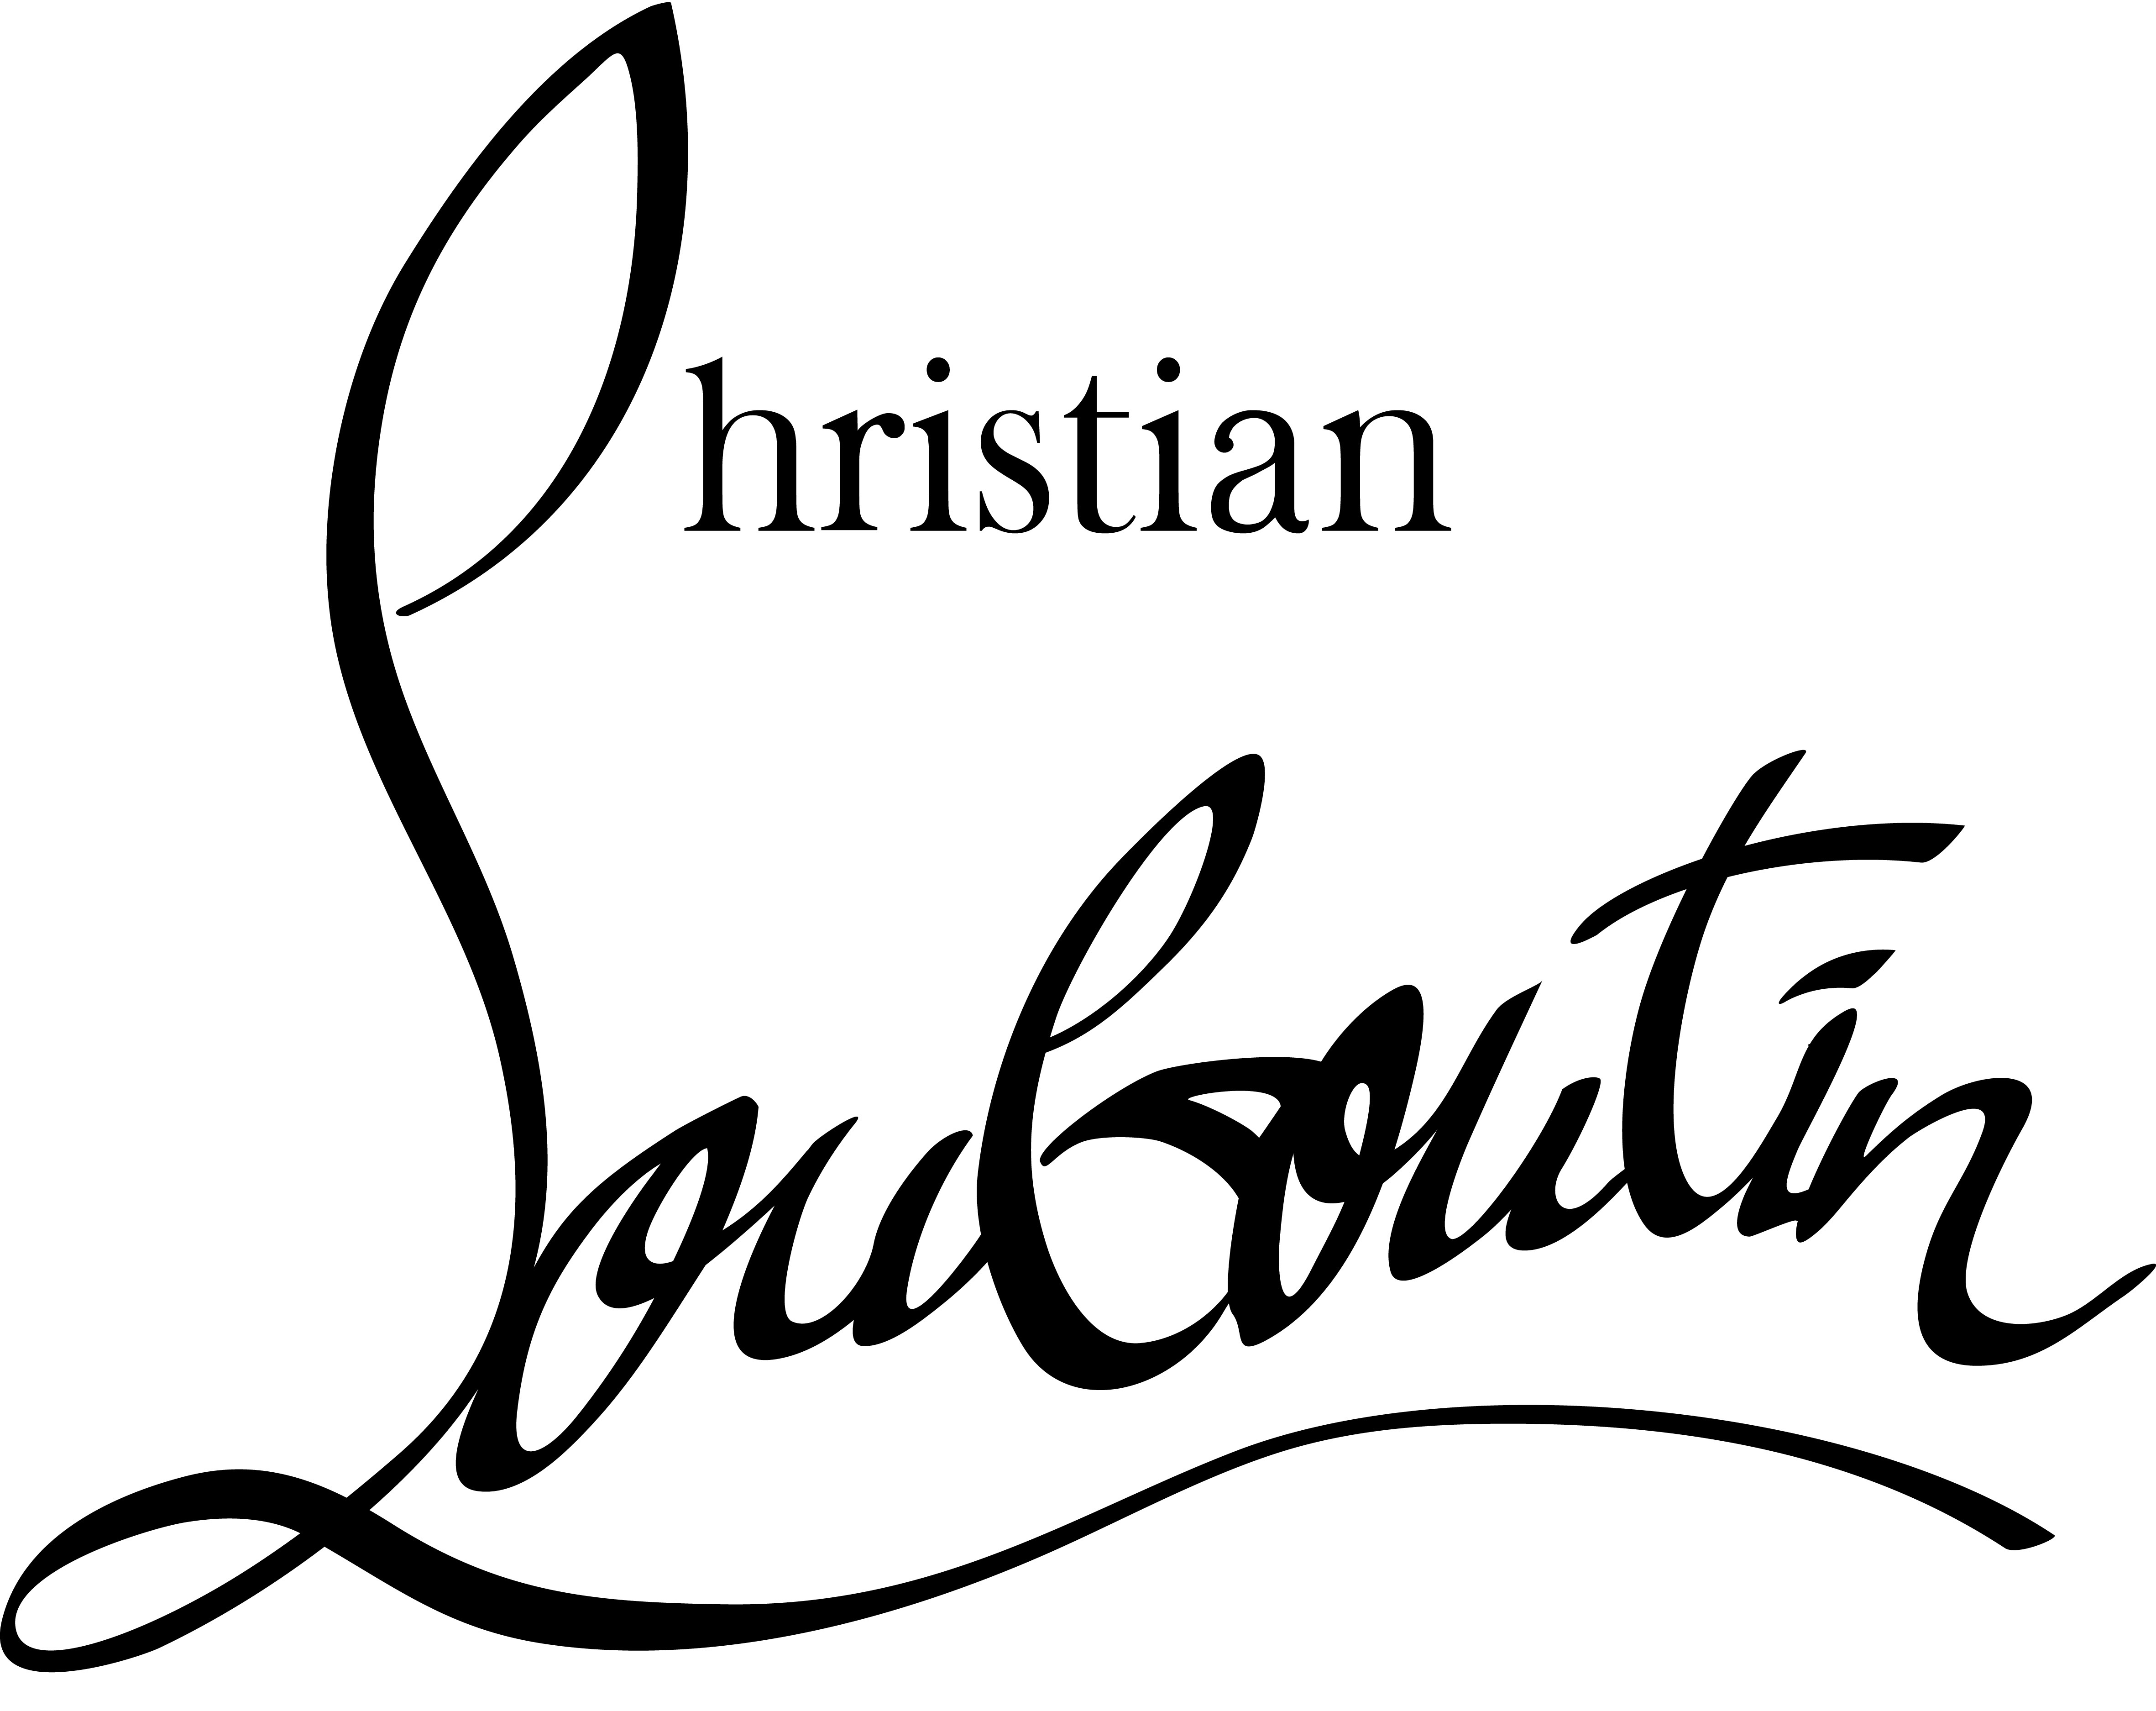 Clothing brand Christian Louboutin wallpapers and images - wallpapers